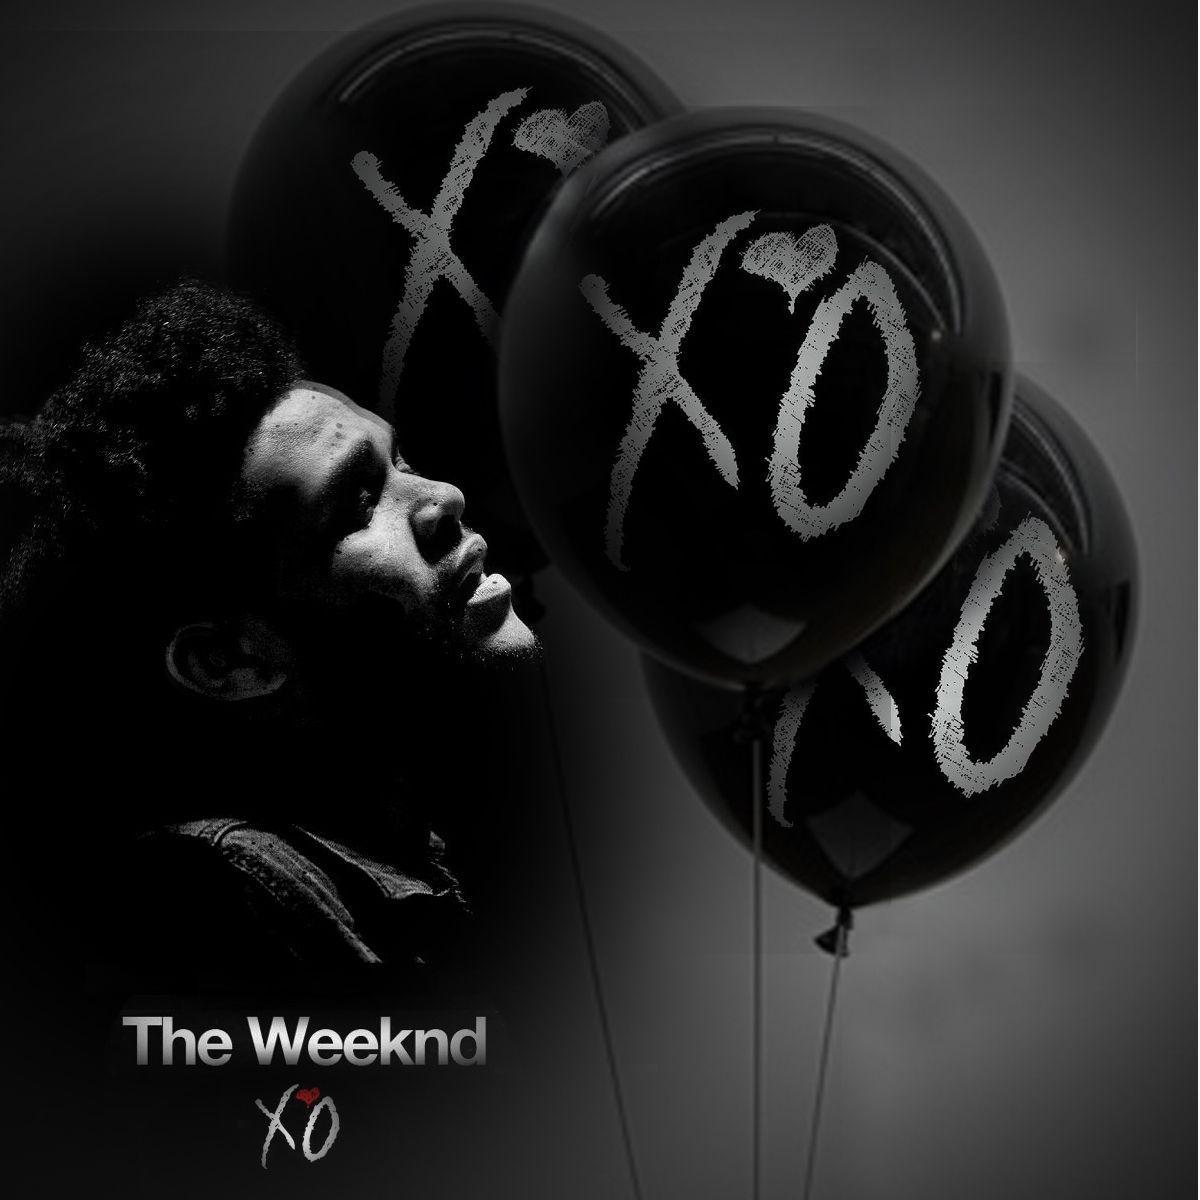 Similiar House Of Balloons The Weeknd Wallpaper Keywords - Weeknd Xo House Of Balloons , HD Wallpaper & Backgrounds